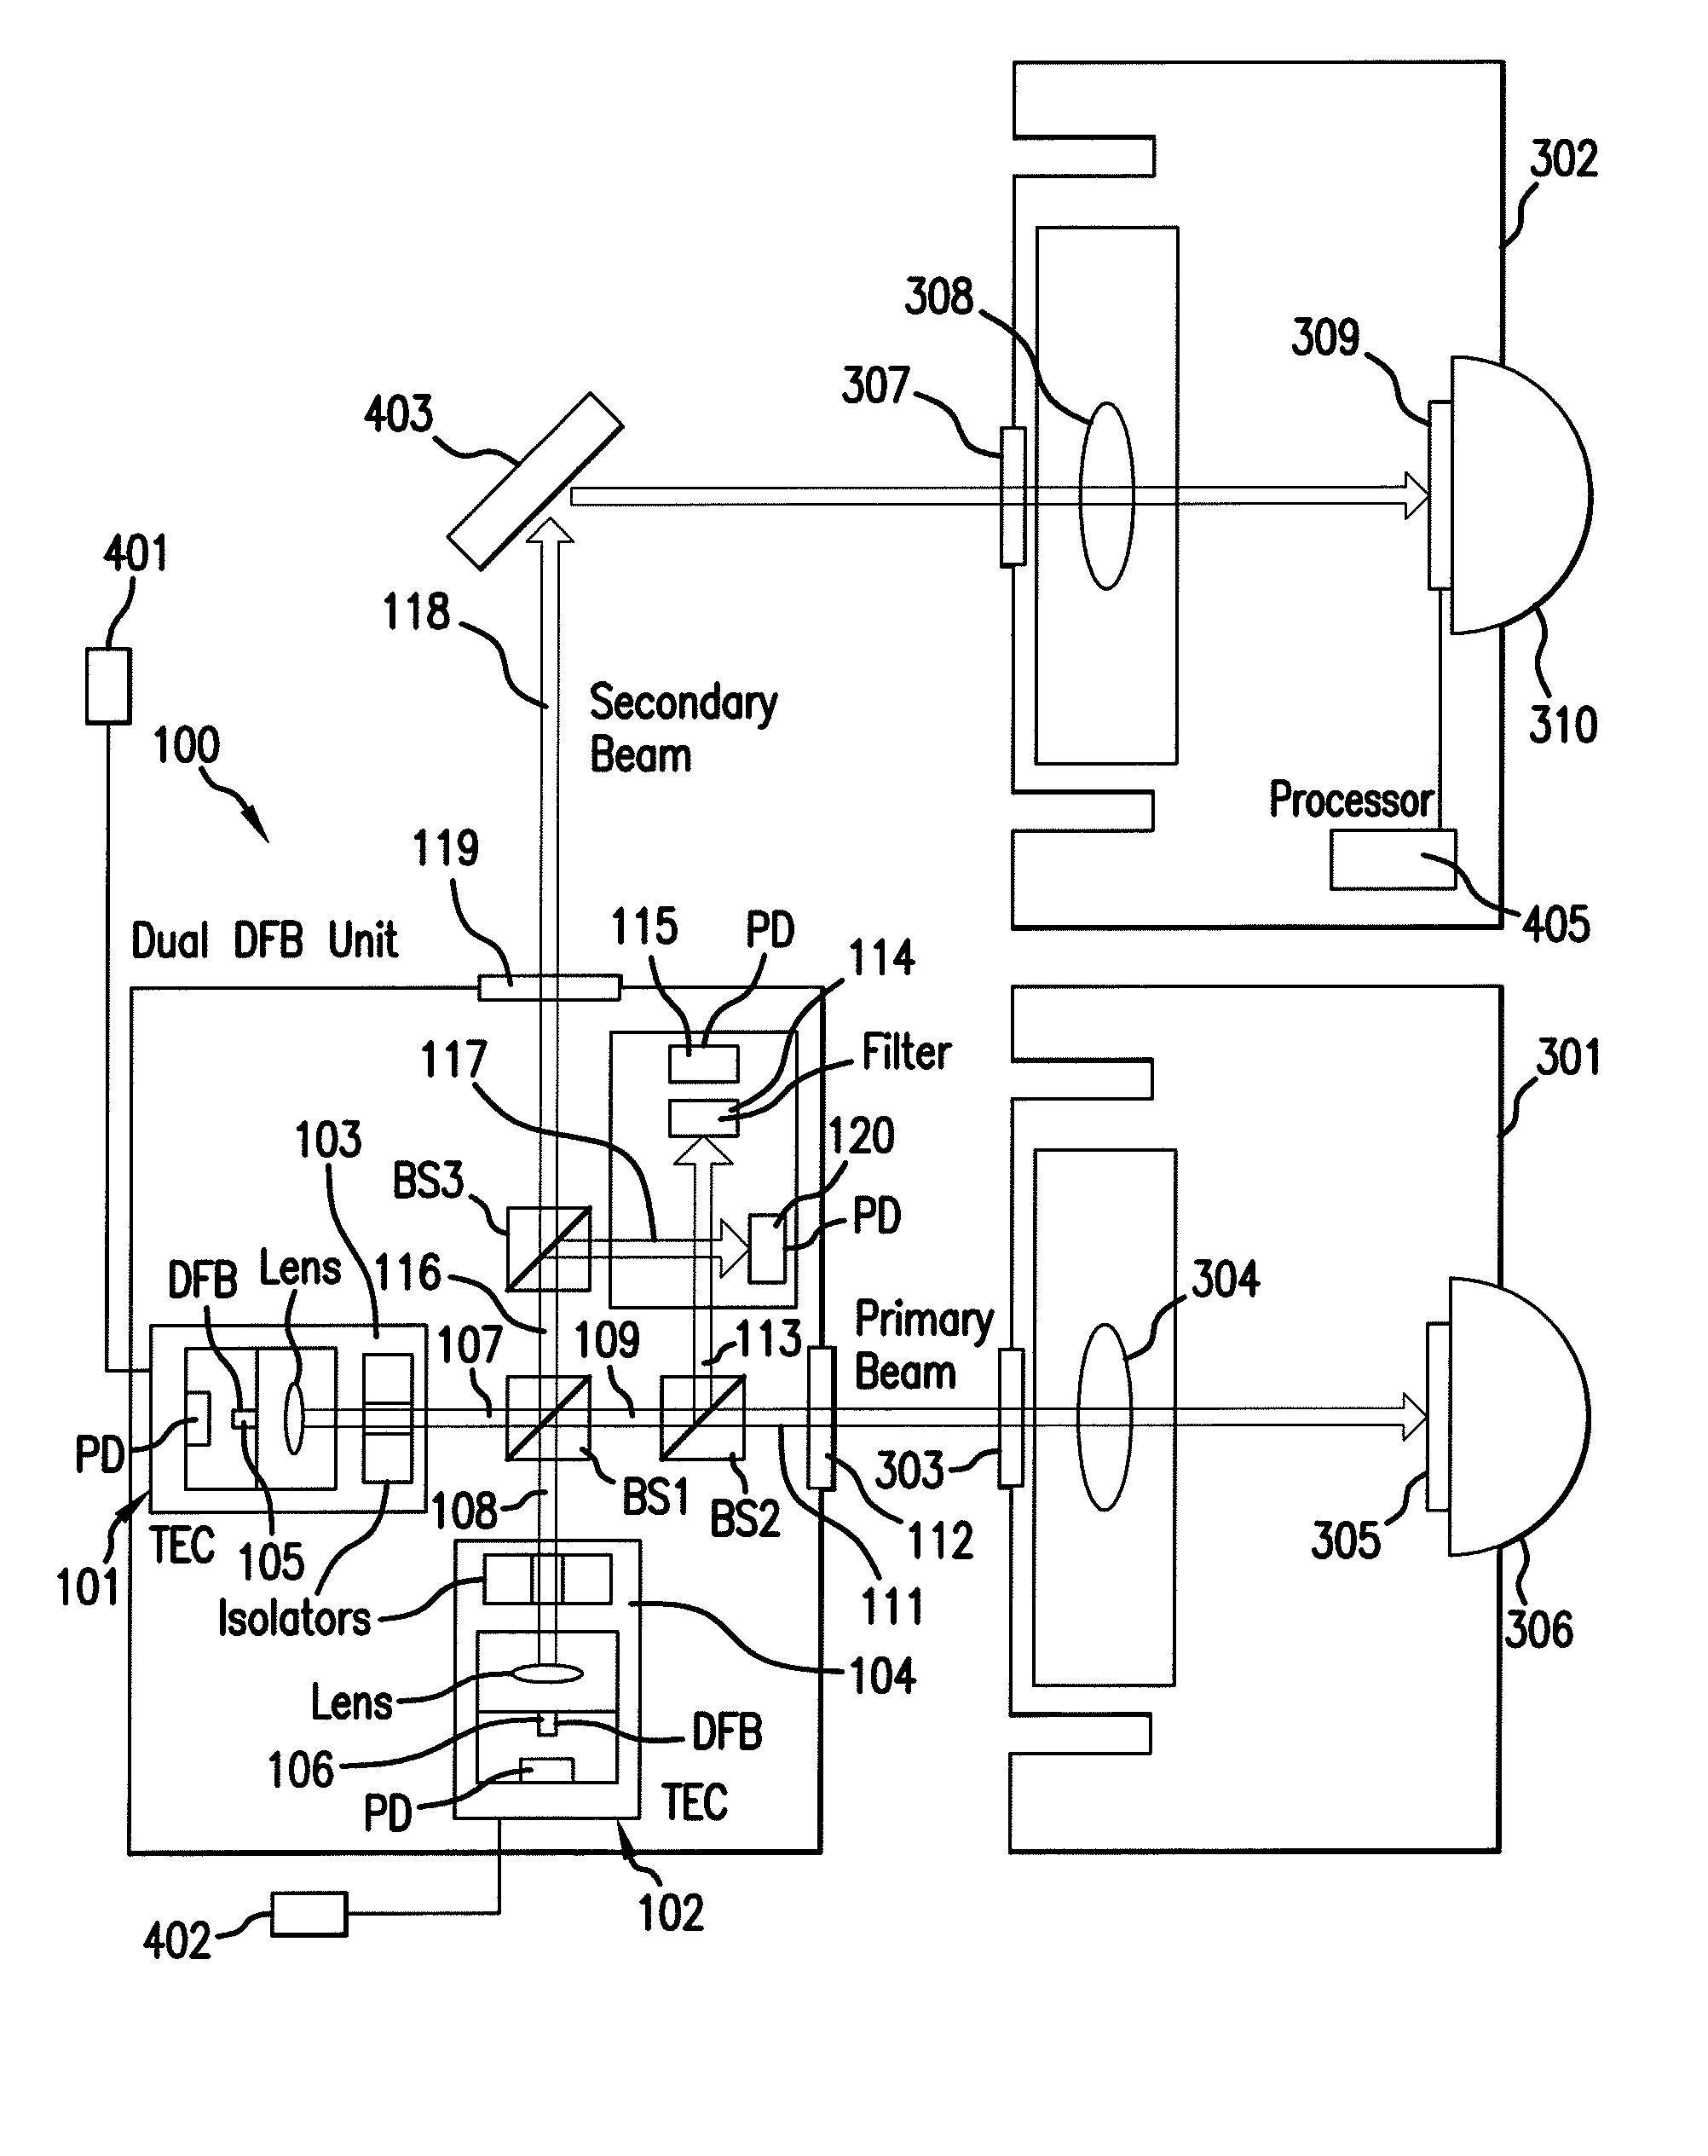 Terahertz Frequency Domain Spectrometer with Integrated Dual Laser Module